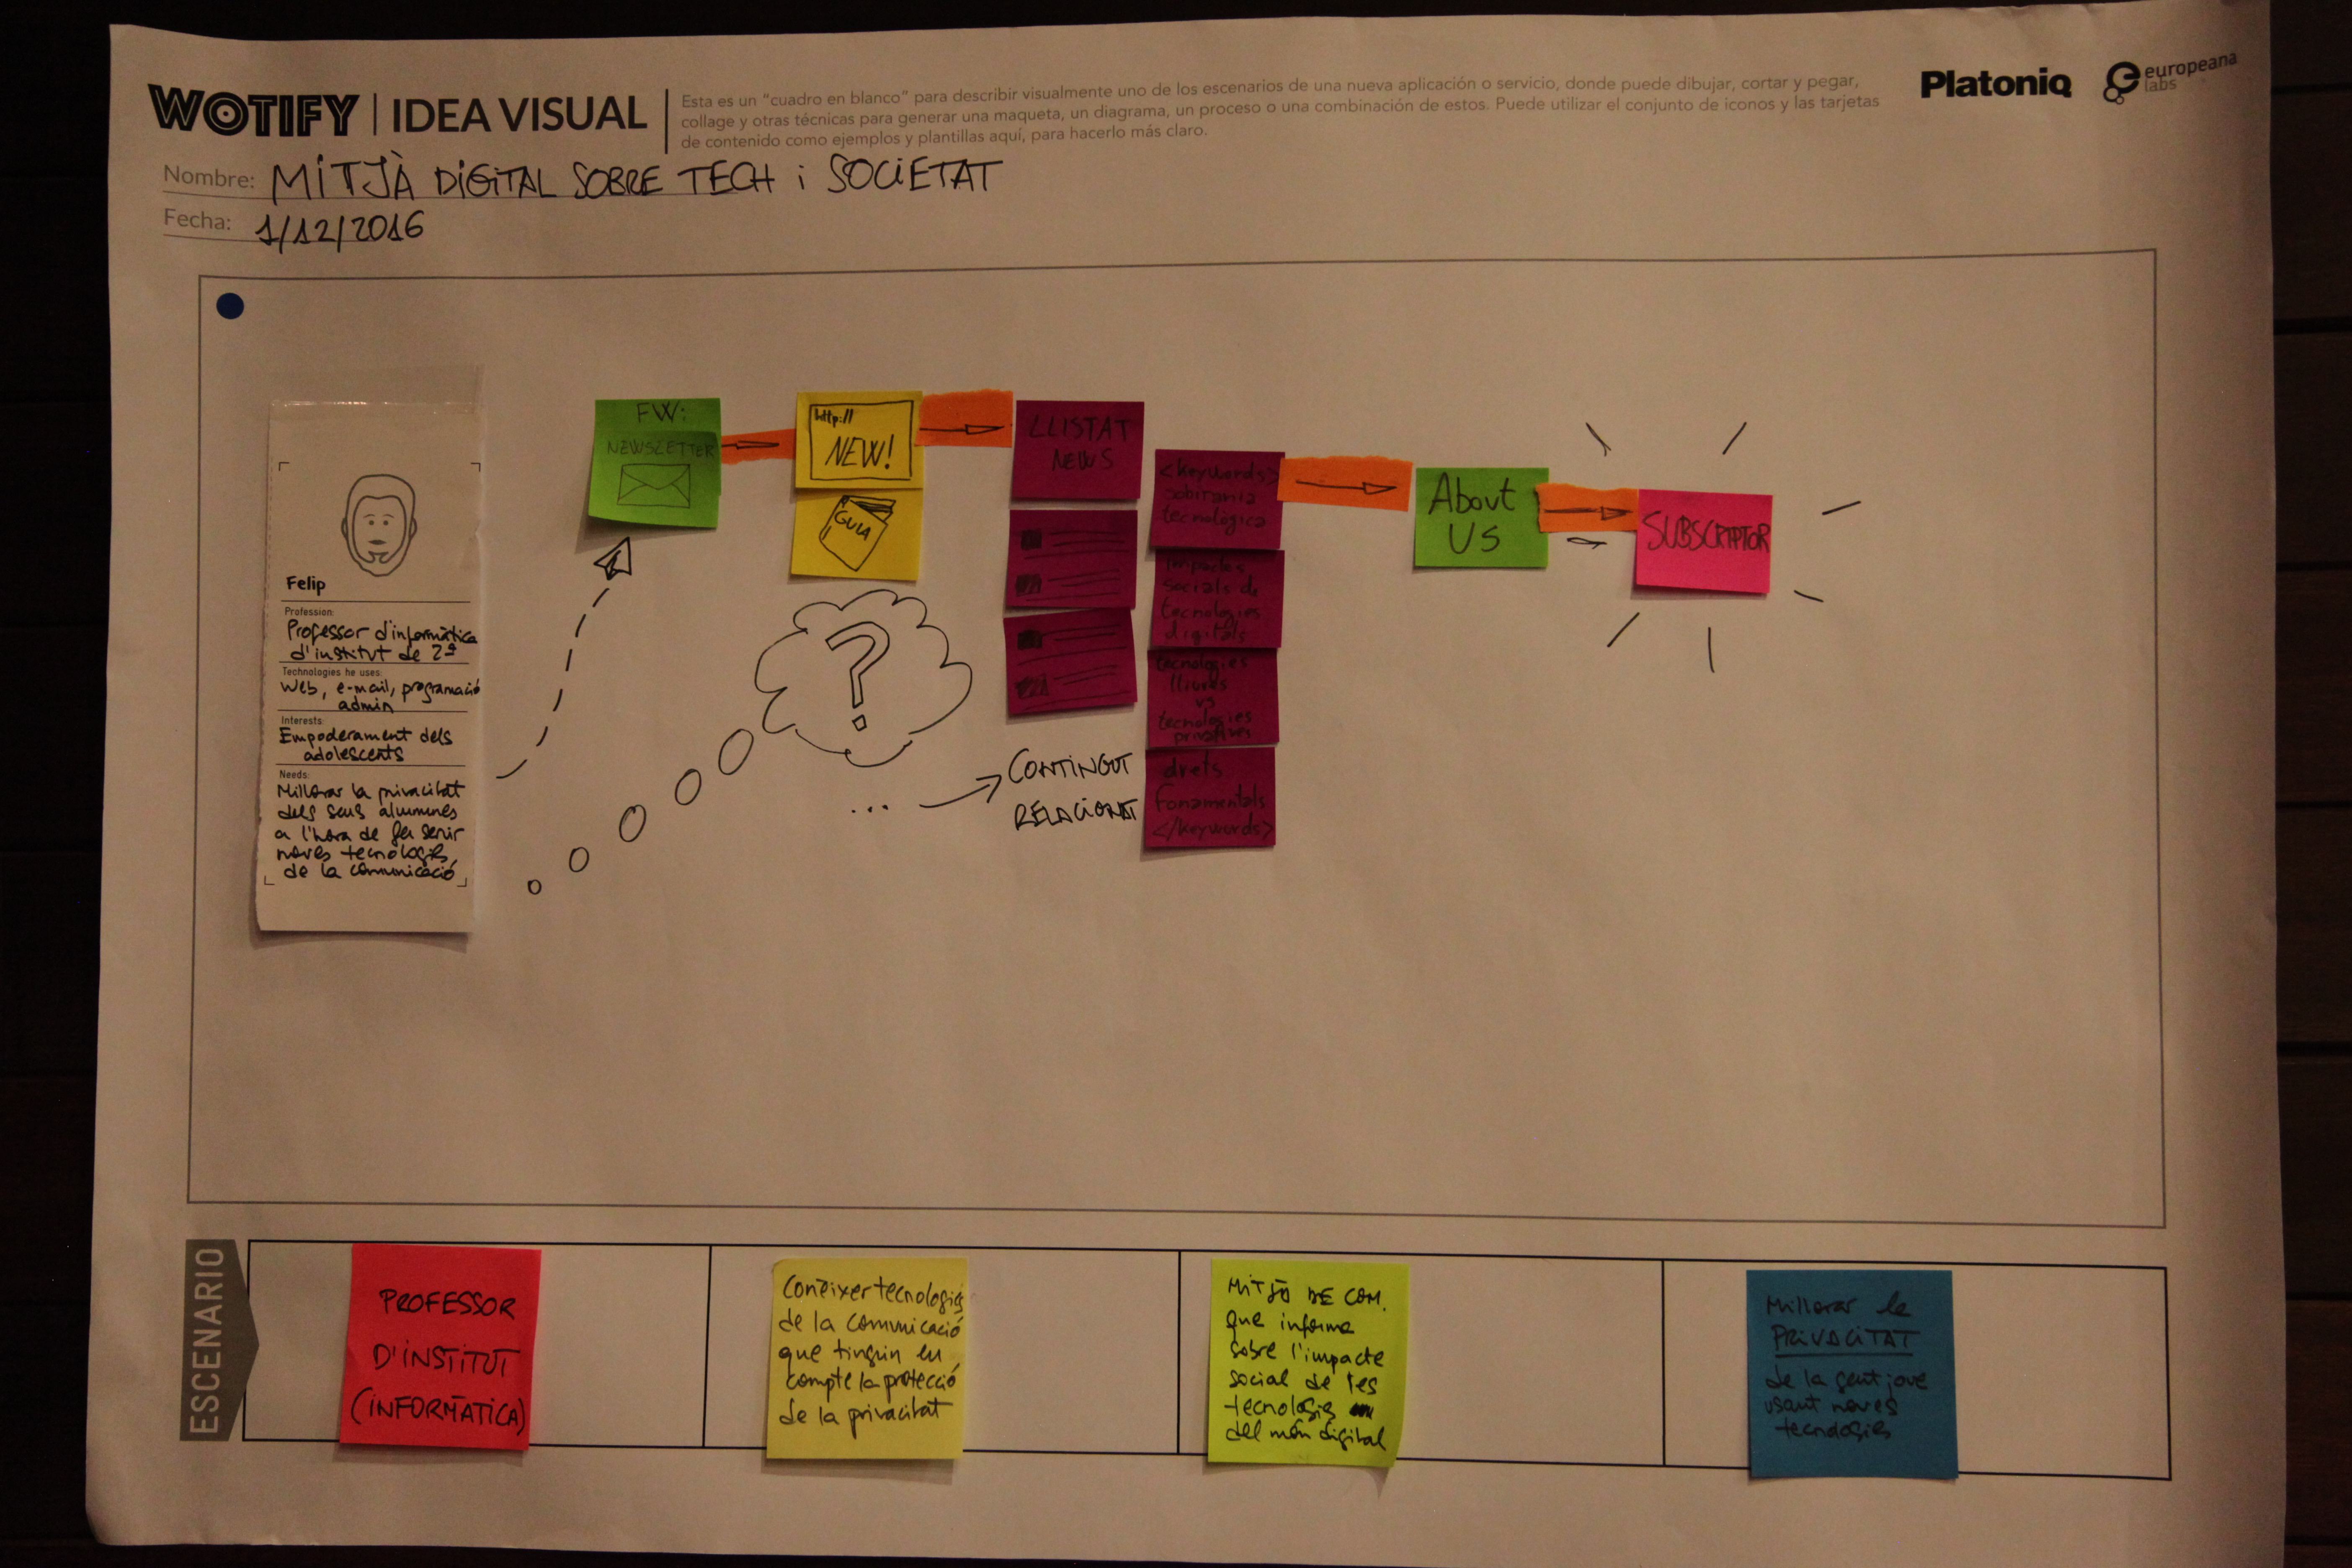 4. Maximize Reach of Collaborative Projects